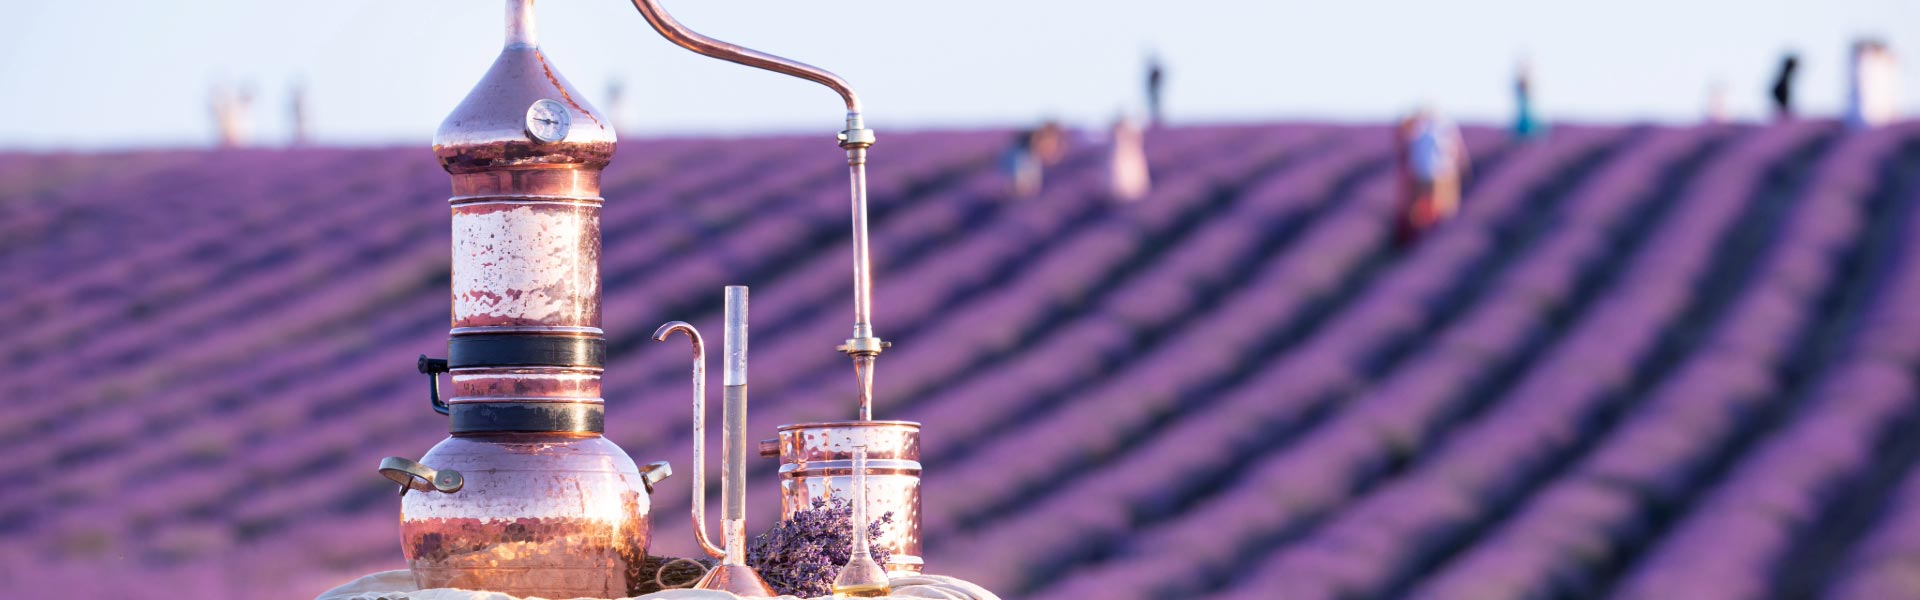 A copper distiller equipment standing on a table in front of a rows of Lavender plants